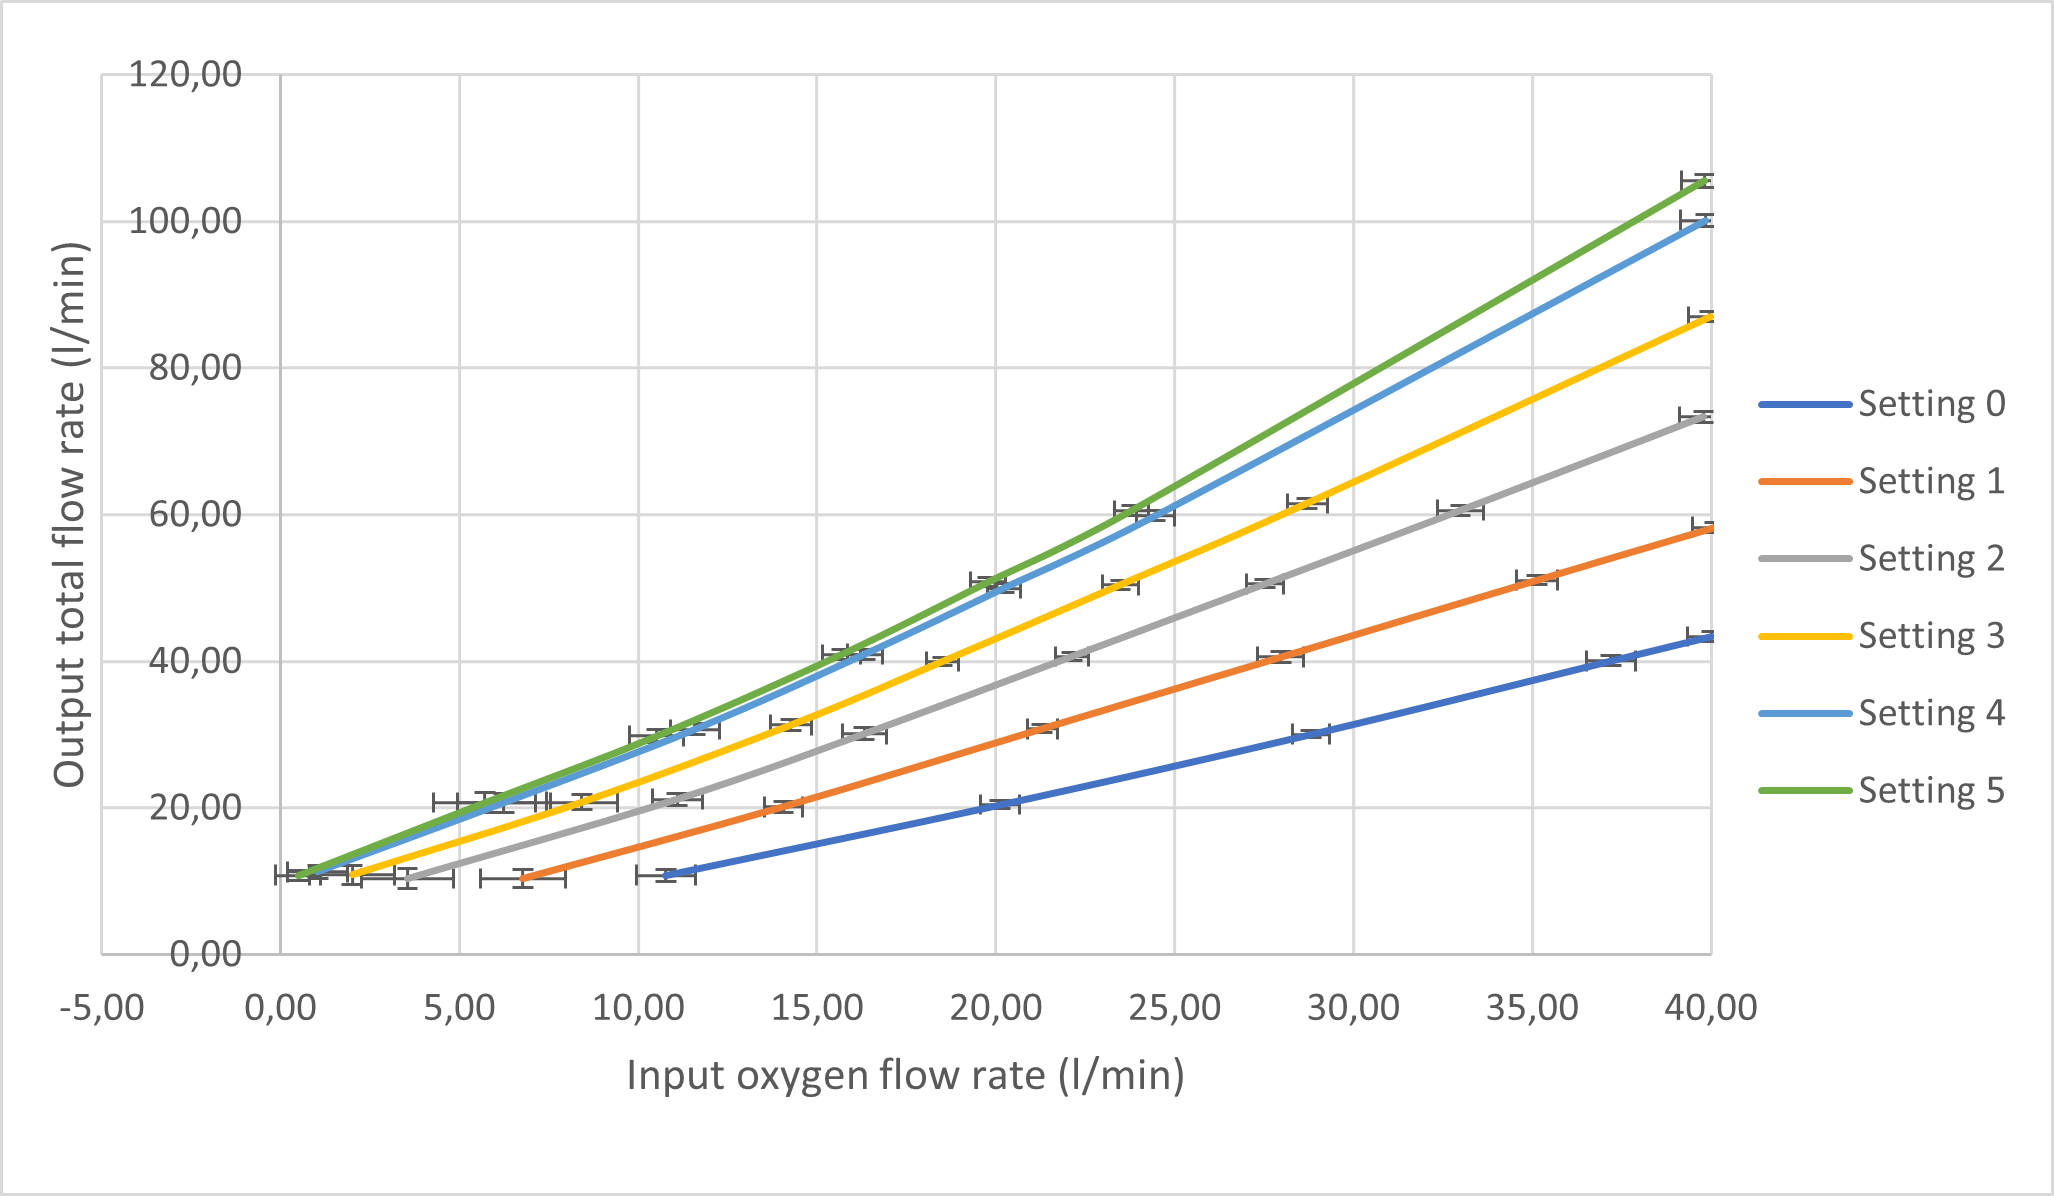 Figure 2: Mean flow rates for input oxygen and total flow for each setting onthe entrainer valve, with standard deviation error bars showing measurement precision.